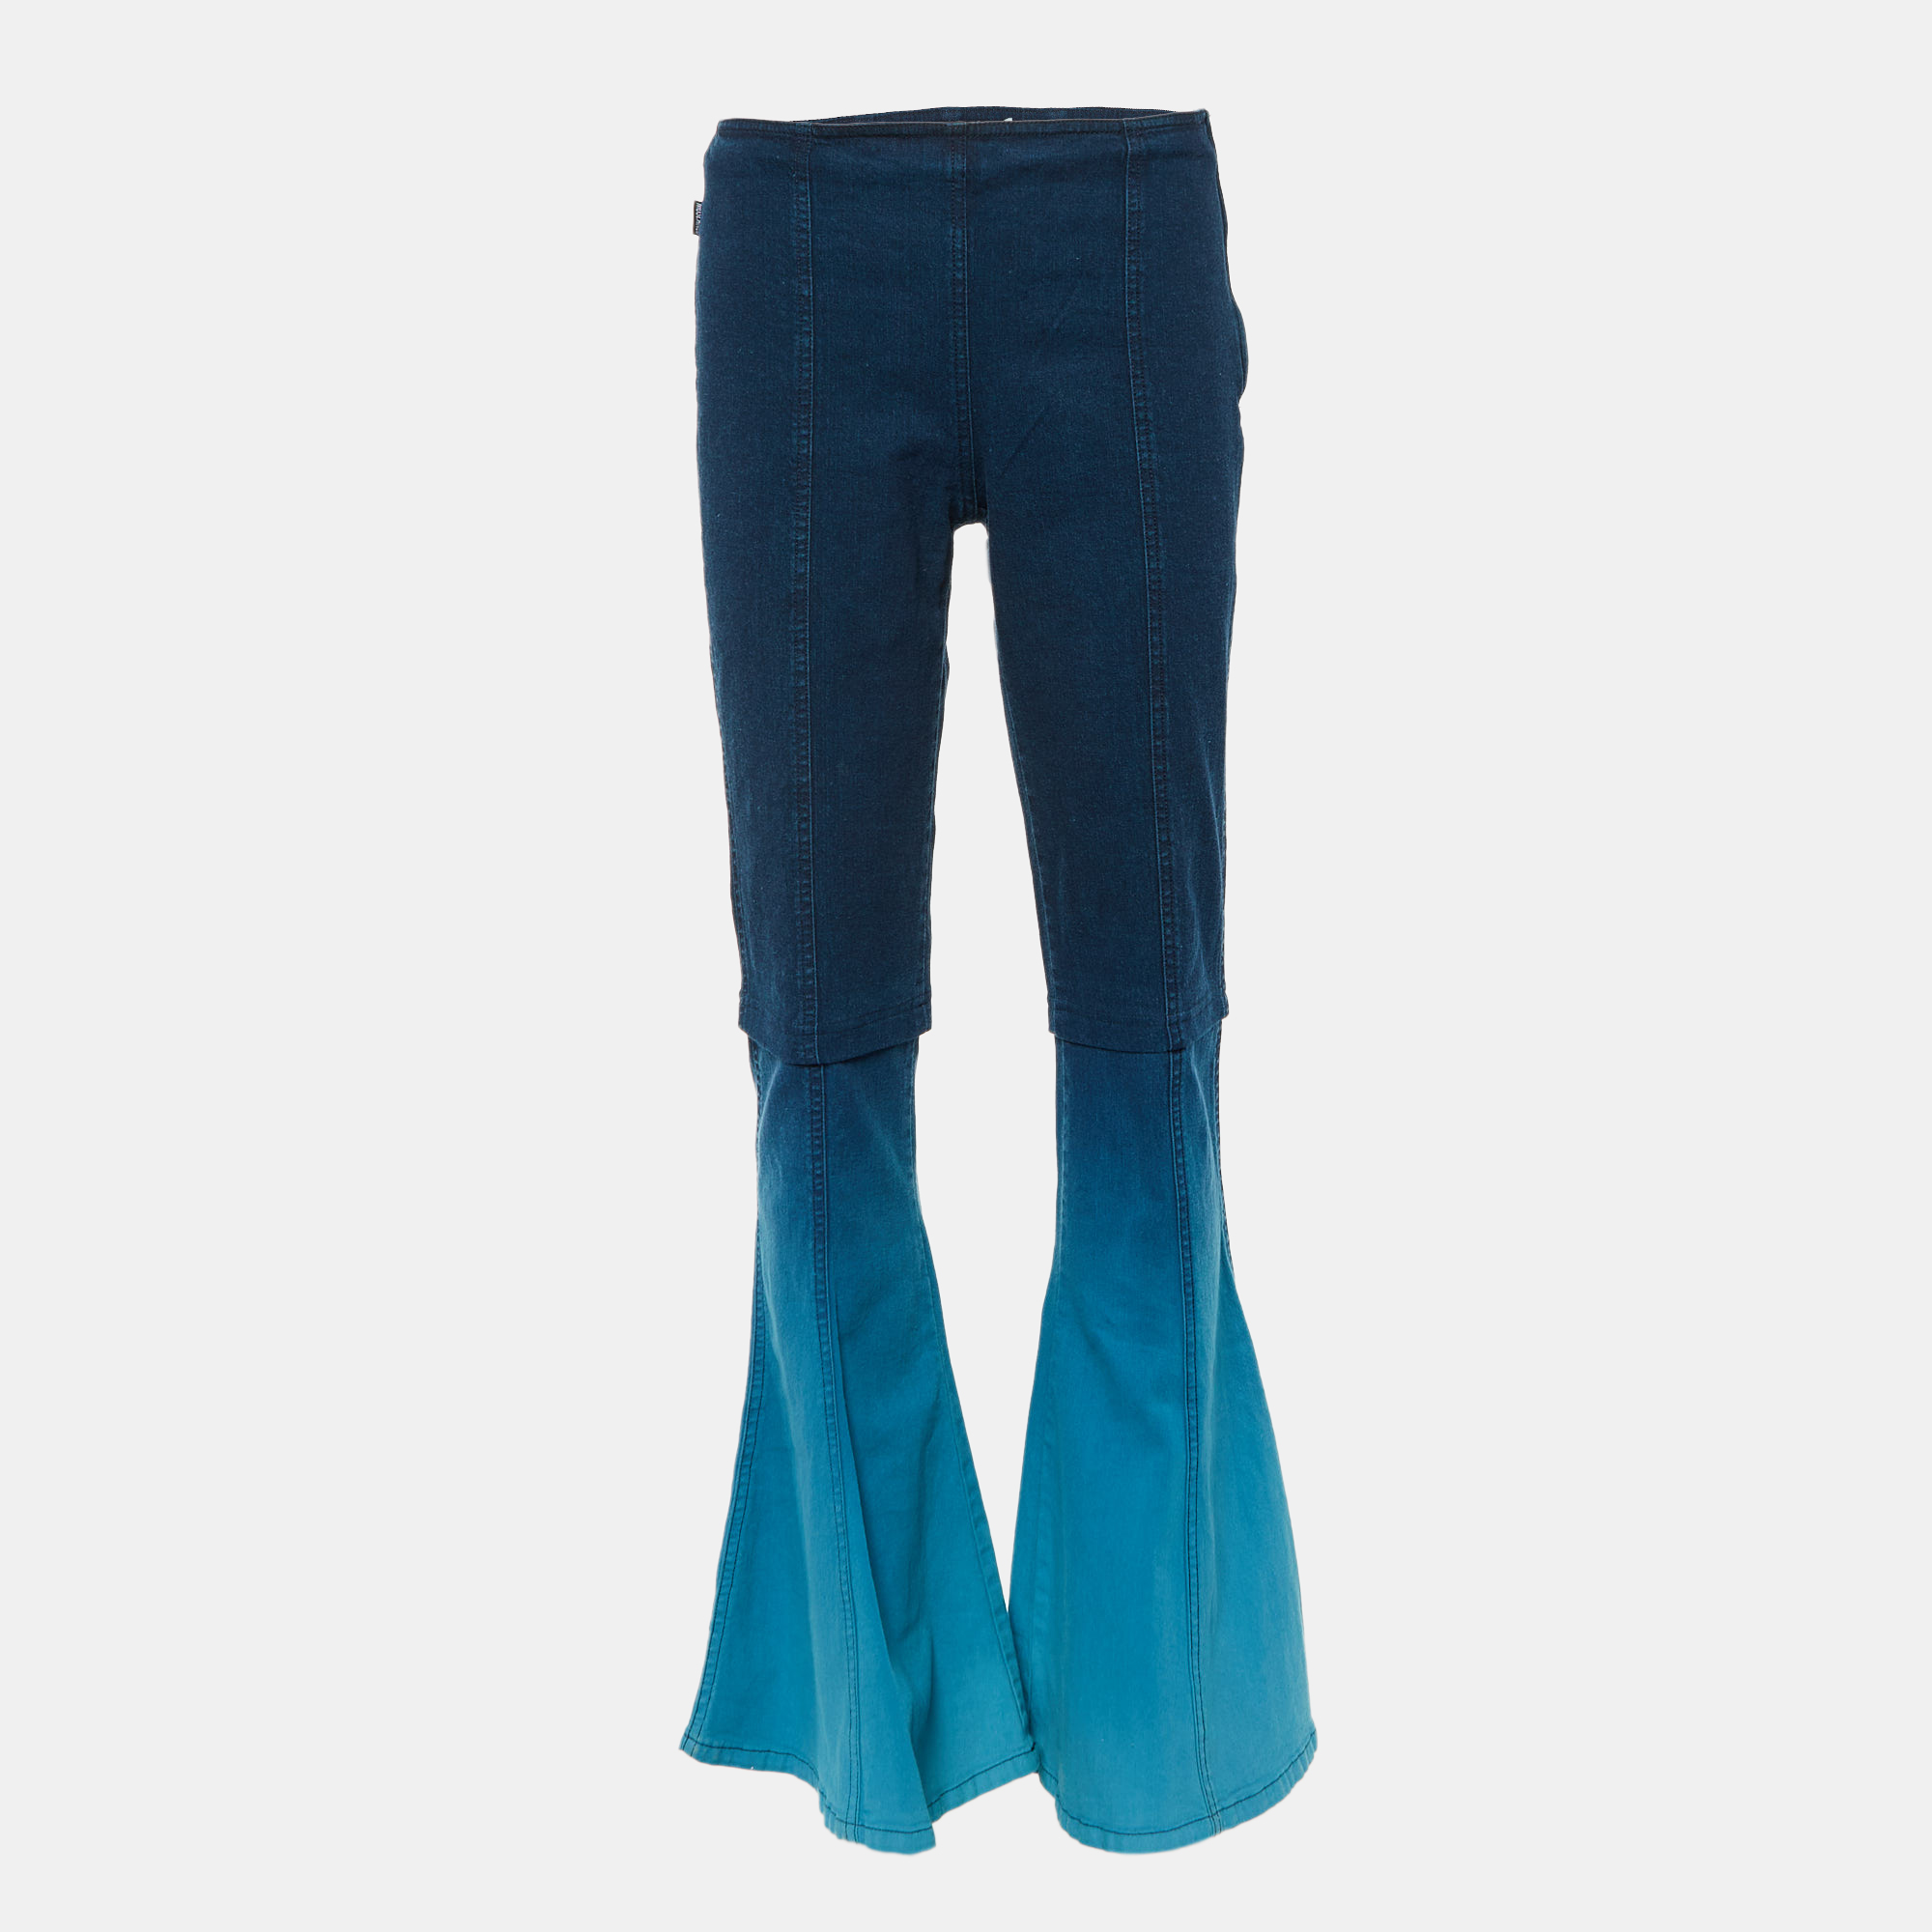 Moschino Jeans Blue Ombre Denim Flared Jeans M Waist 28